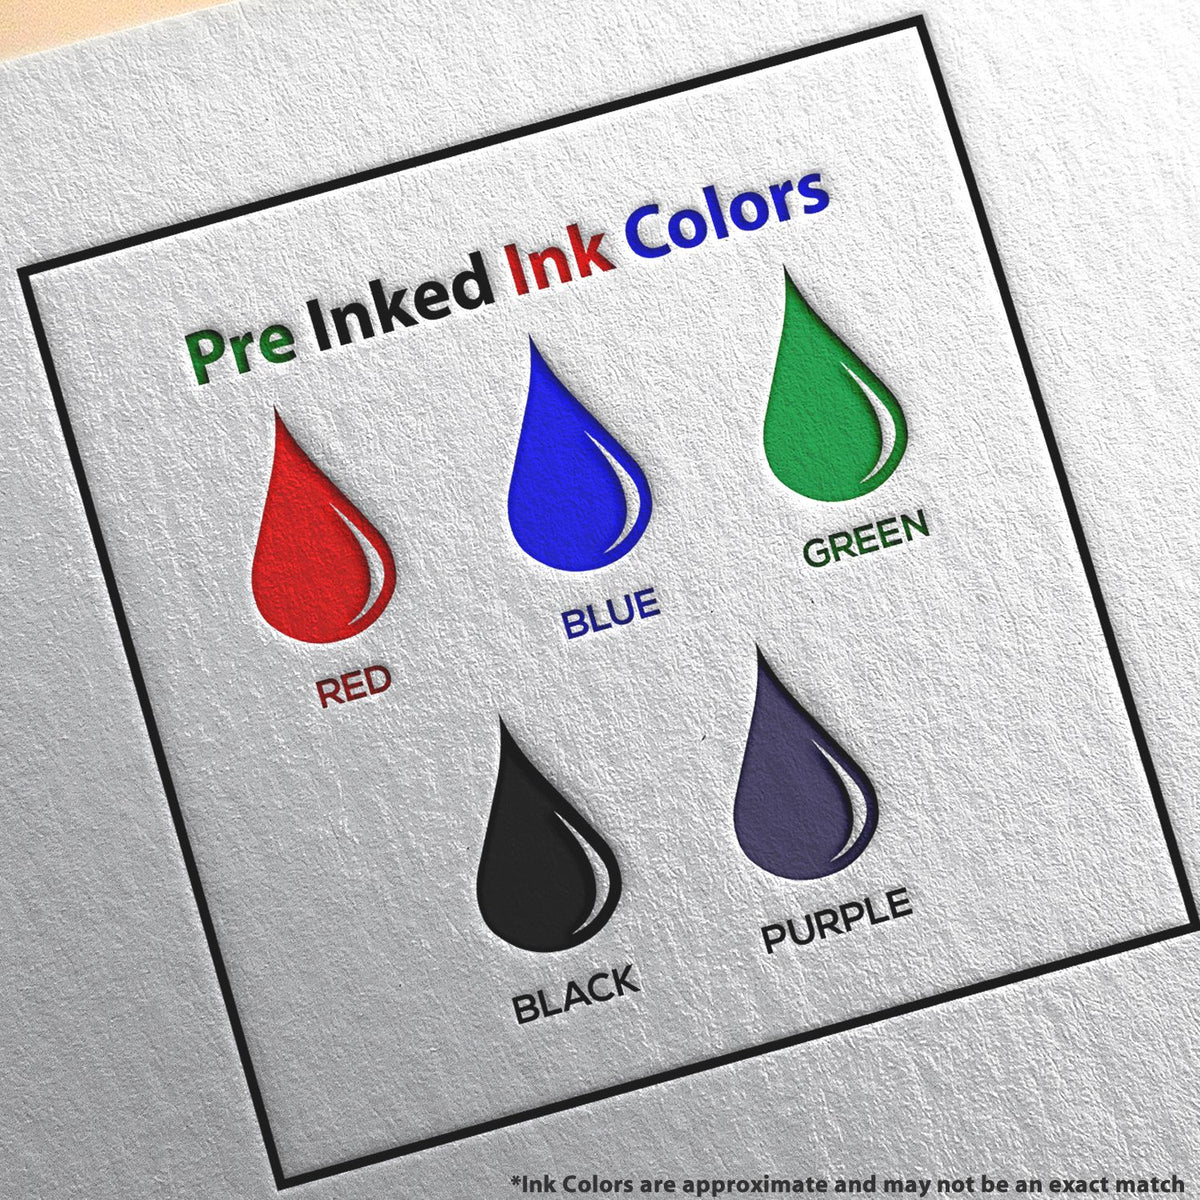 A picture showing the different ink colors or hues available for the Premium MaxLight Pre-Inked Mississippi Landscape Architectural Stamp product.